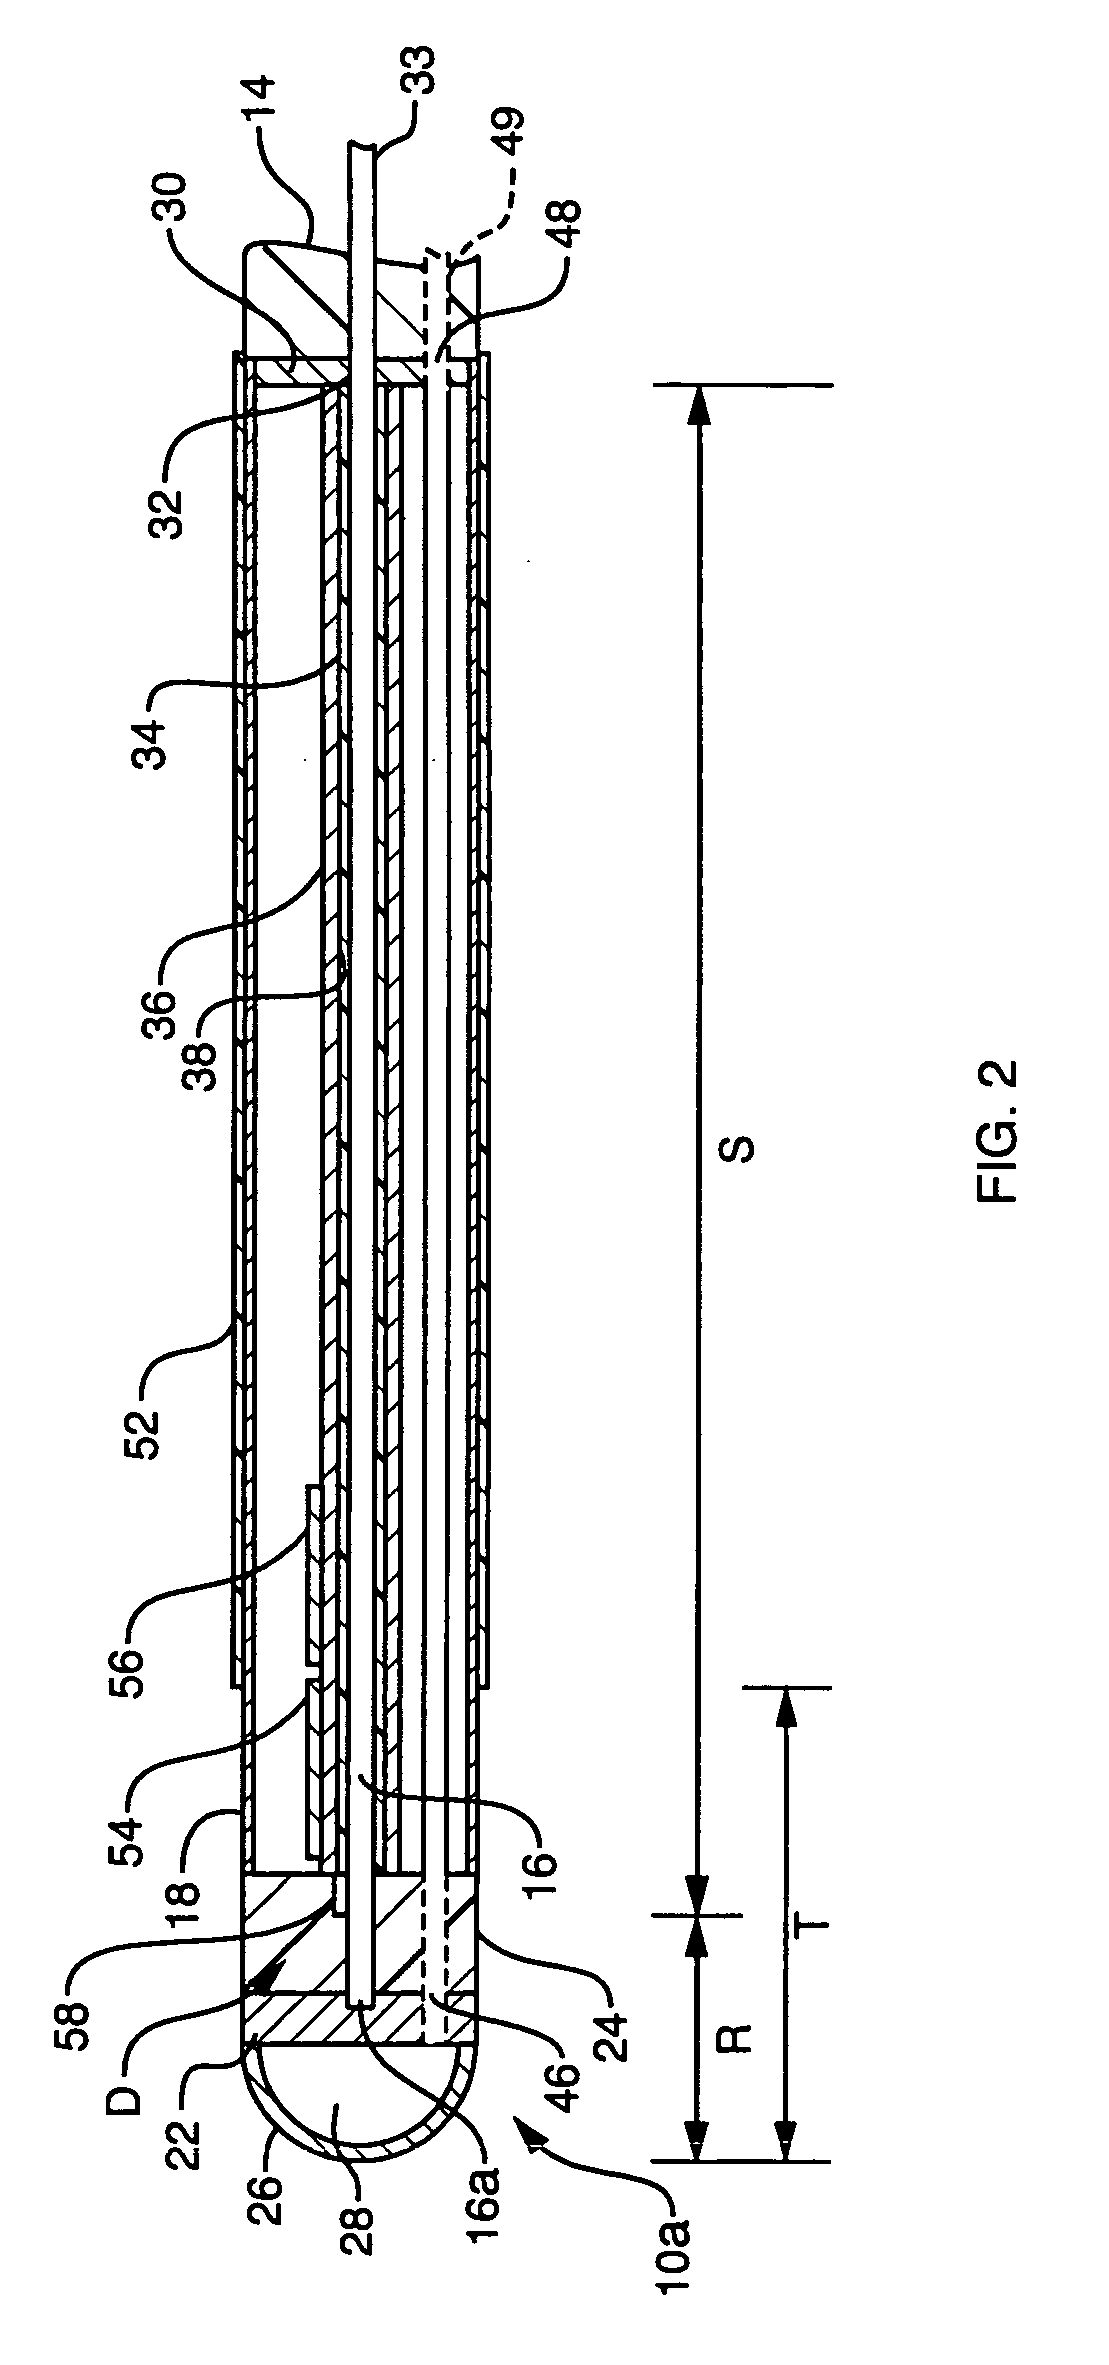 Integrated heating/sensing catheter apparatus for minimally invasive applications